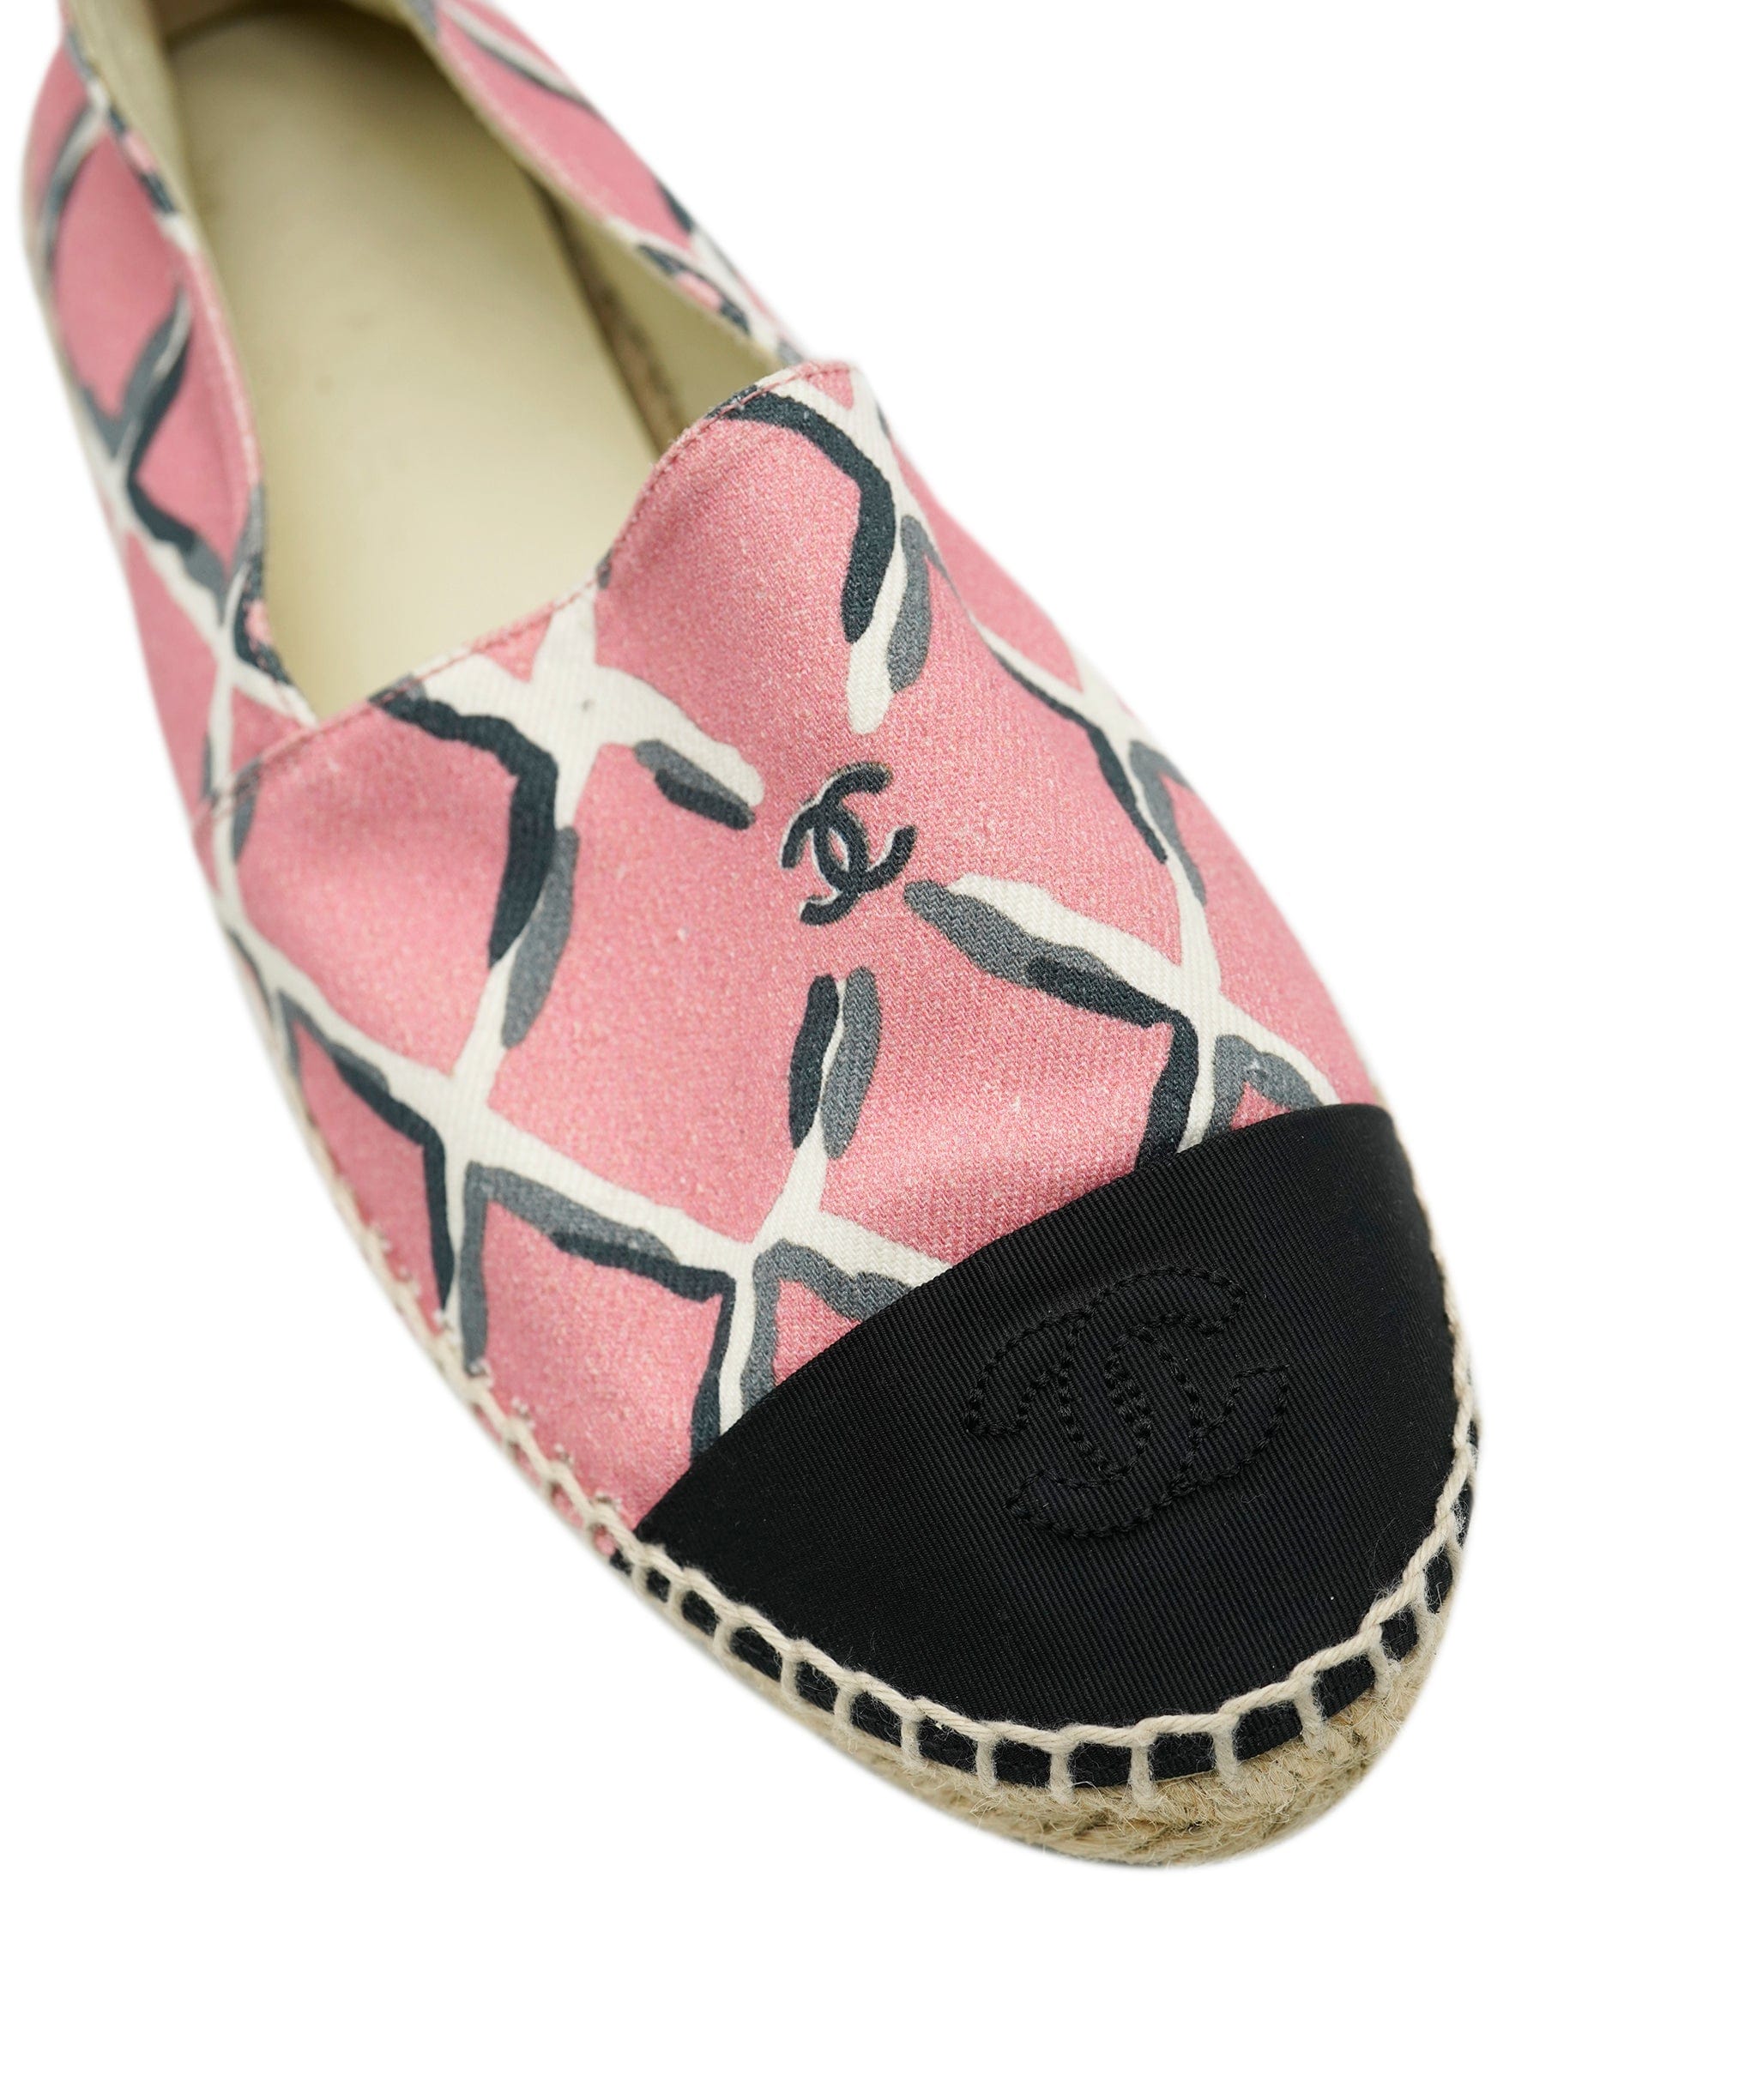 Chanel Chanel espadrilles pink 38 AVC1982